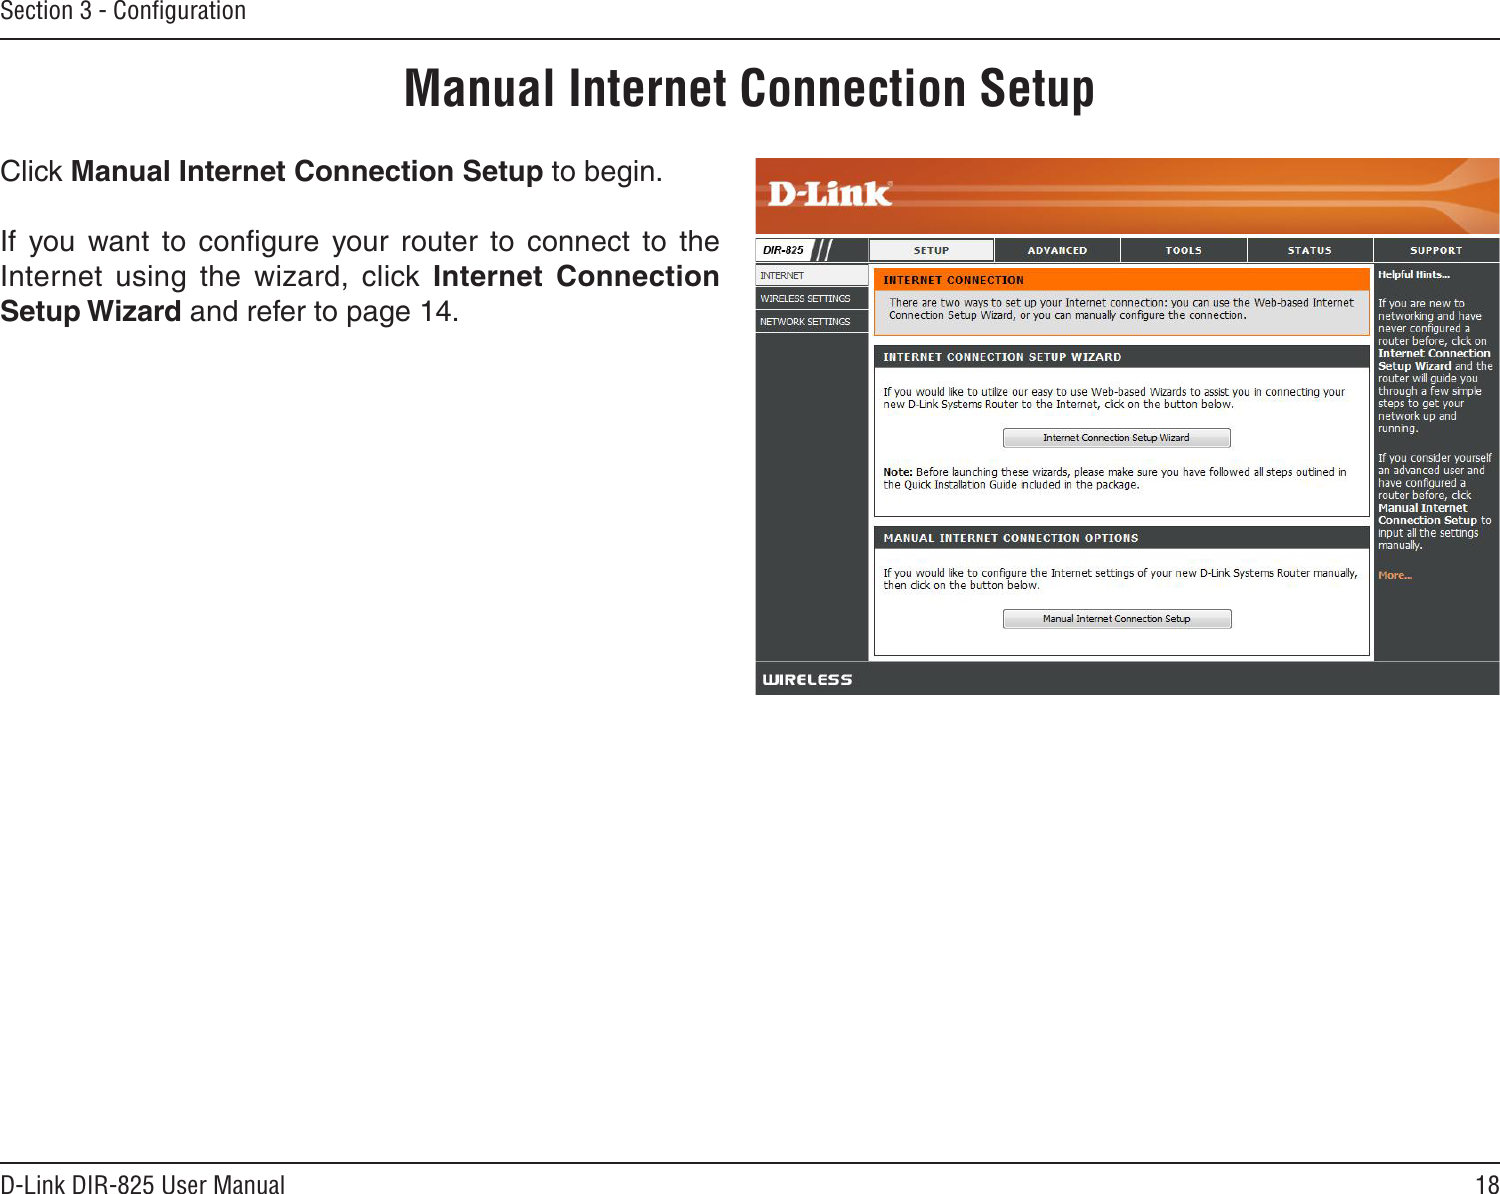 18D-Link DIR-825 User ManualSection 3 - ConﬁgurationManual Internet Connection SetupClick Manual Internet Connection Setup to begin.If  you  want  to  conﬁgure  your  router  to  connect  to  the Internet  using  the  wizard,  click  Internet  Connection Setup Wizard and refer to page 14.